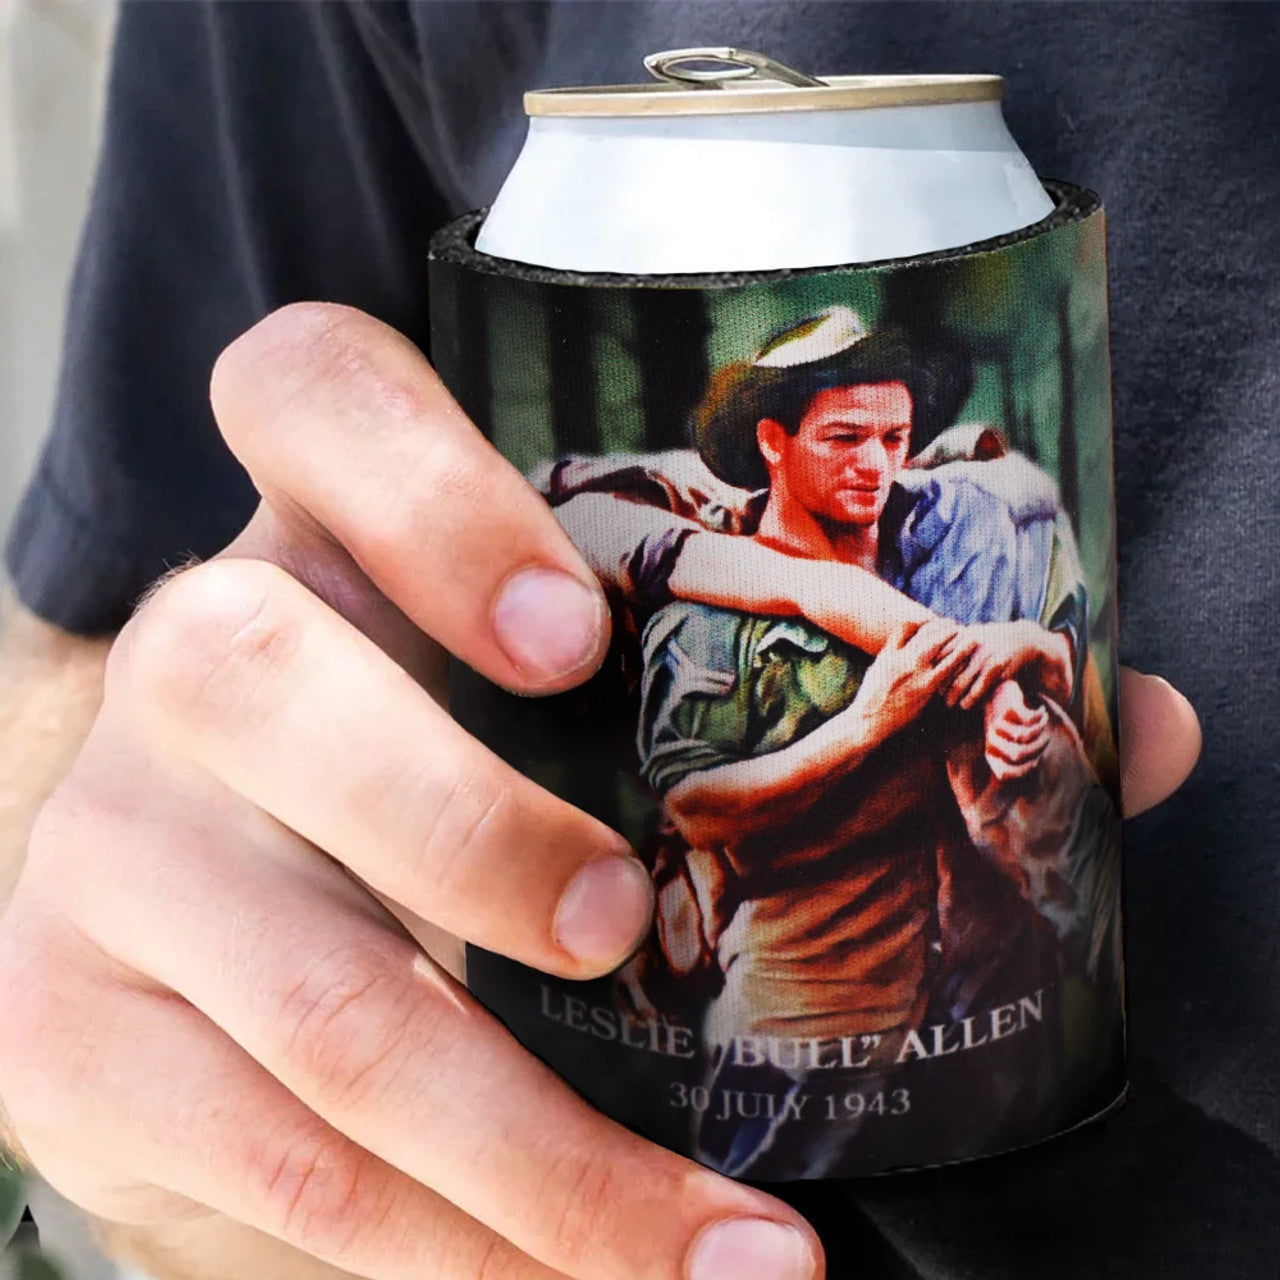 Introducing "The Spirit of Mateship Leslie Bull Allen Drink Cooler," a powerful tribute to the indomitable spirit of Australian soldiers and the enduring bonds of mateship that define them. www.defenceqstore.com.au